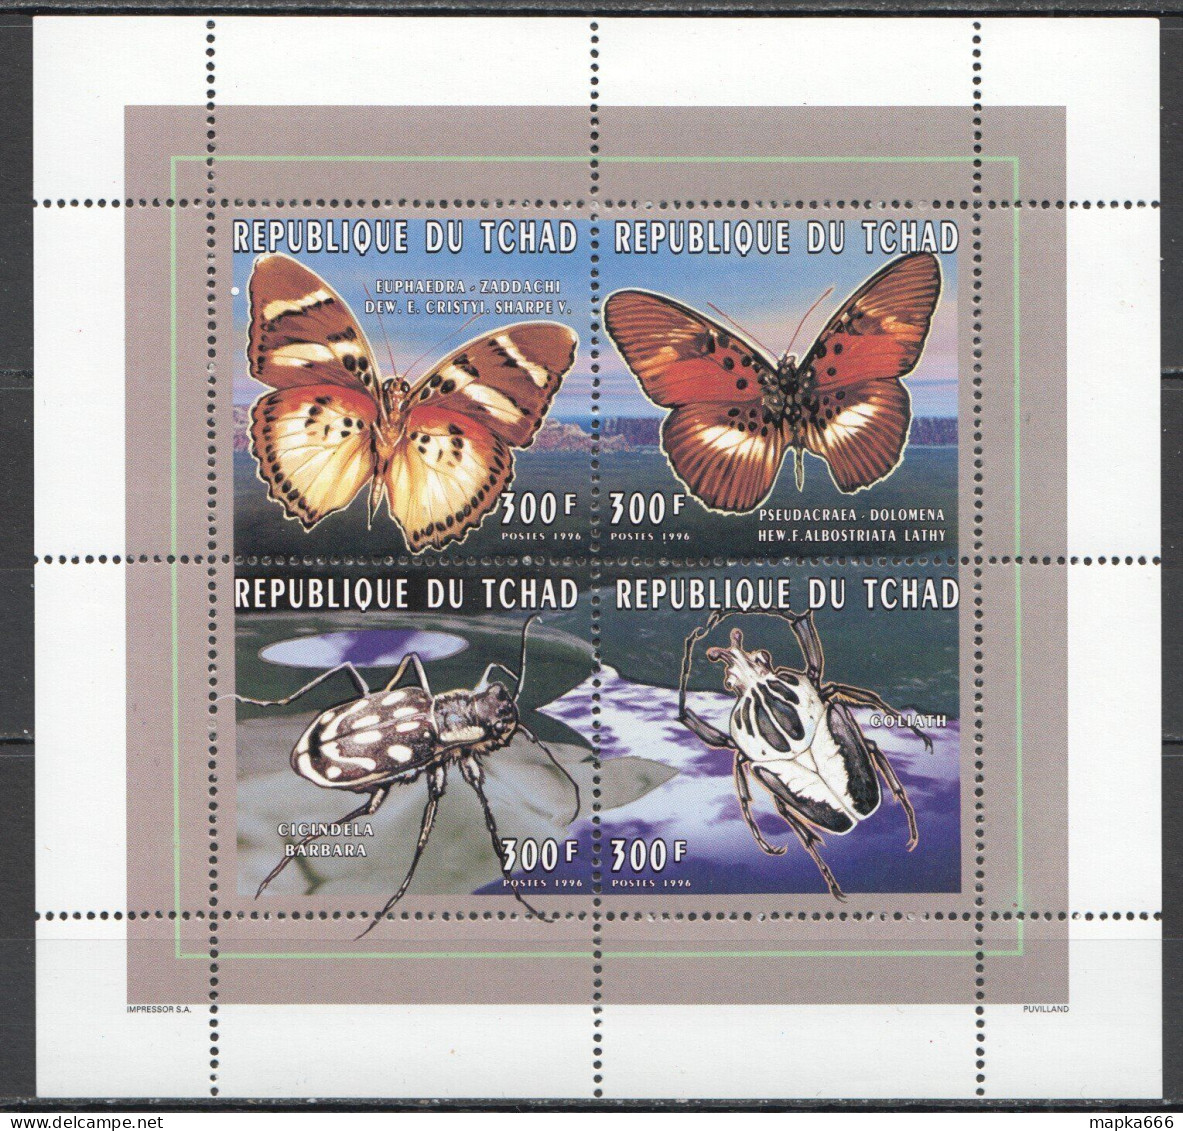 Ft182 1996 Chad Insects & Butterflies Fauna #1391-94 1Kb Mnh - Mariposas